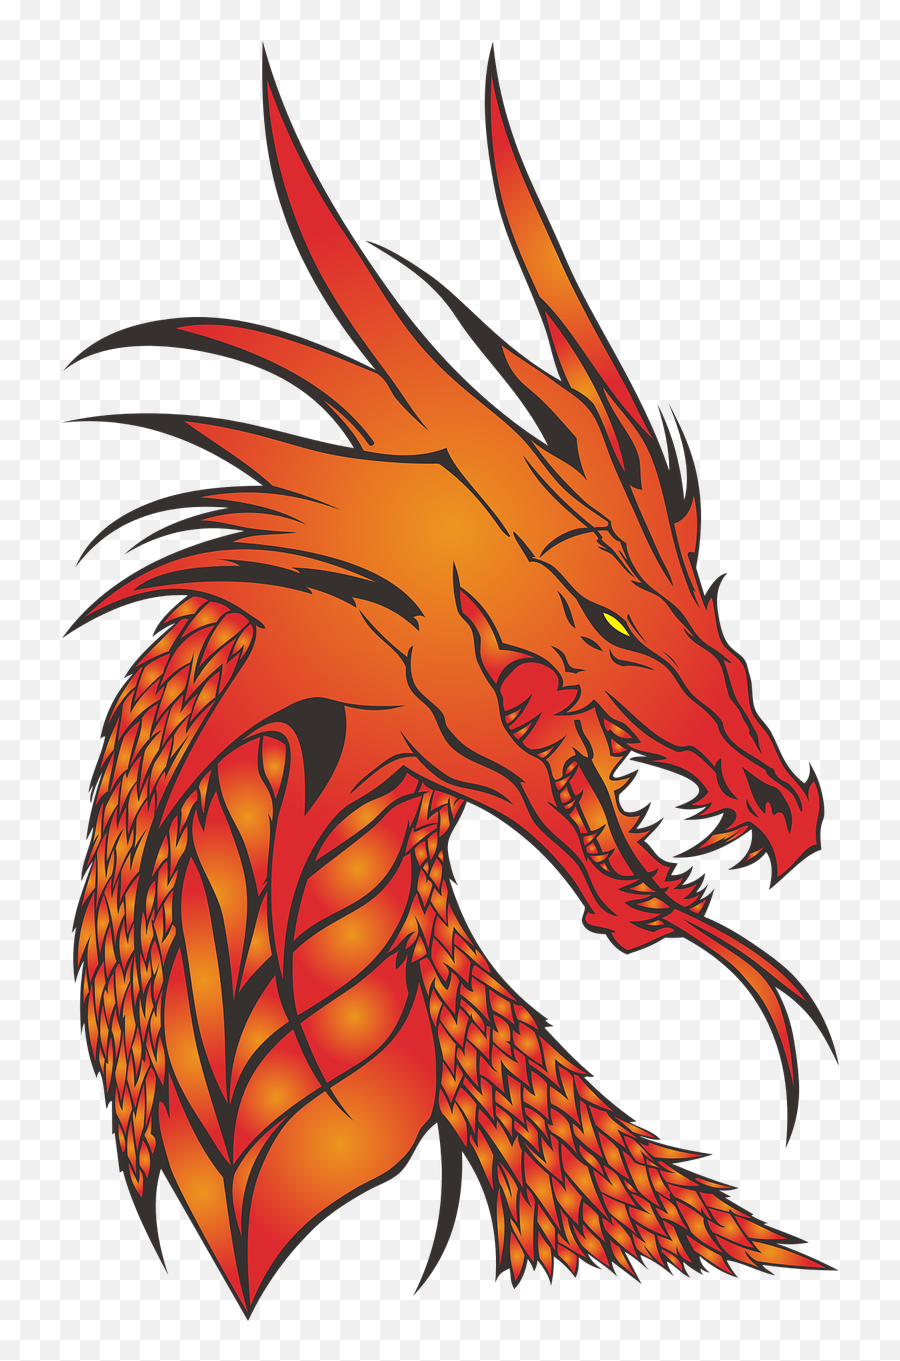 Download Dragon No Background The Head - Dragon Silhouette Png,Dragon Head Png